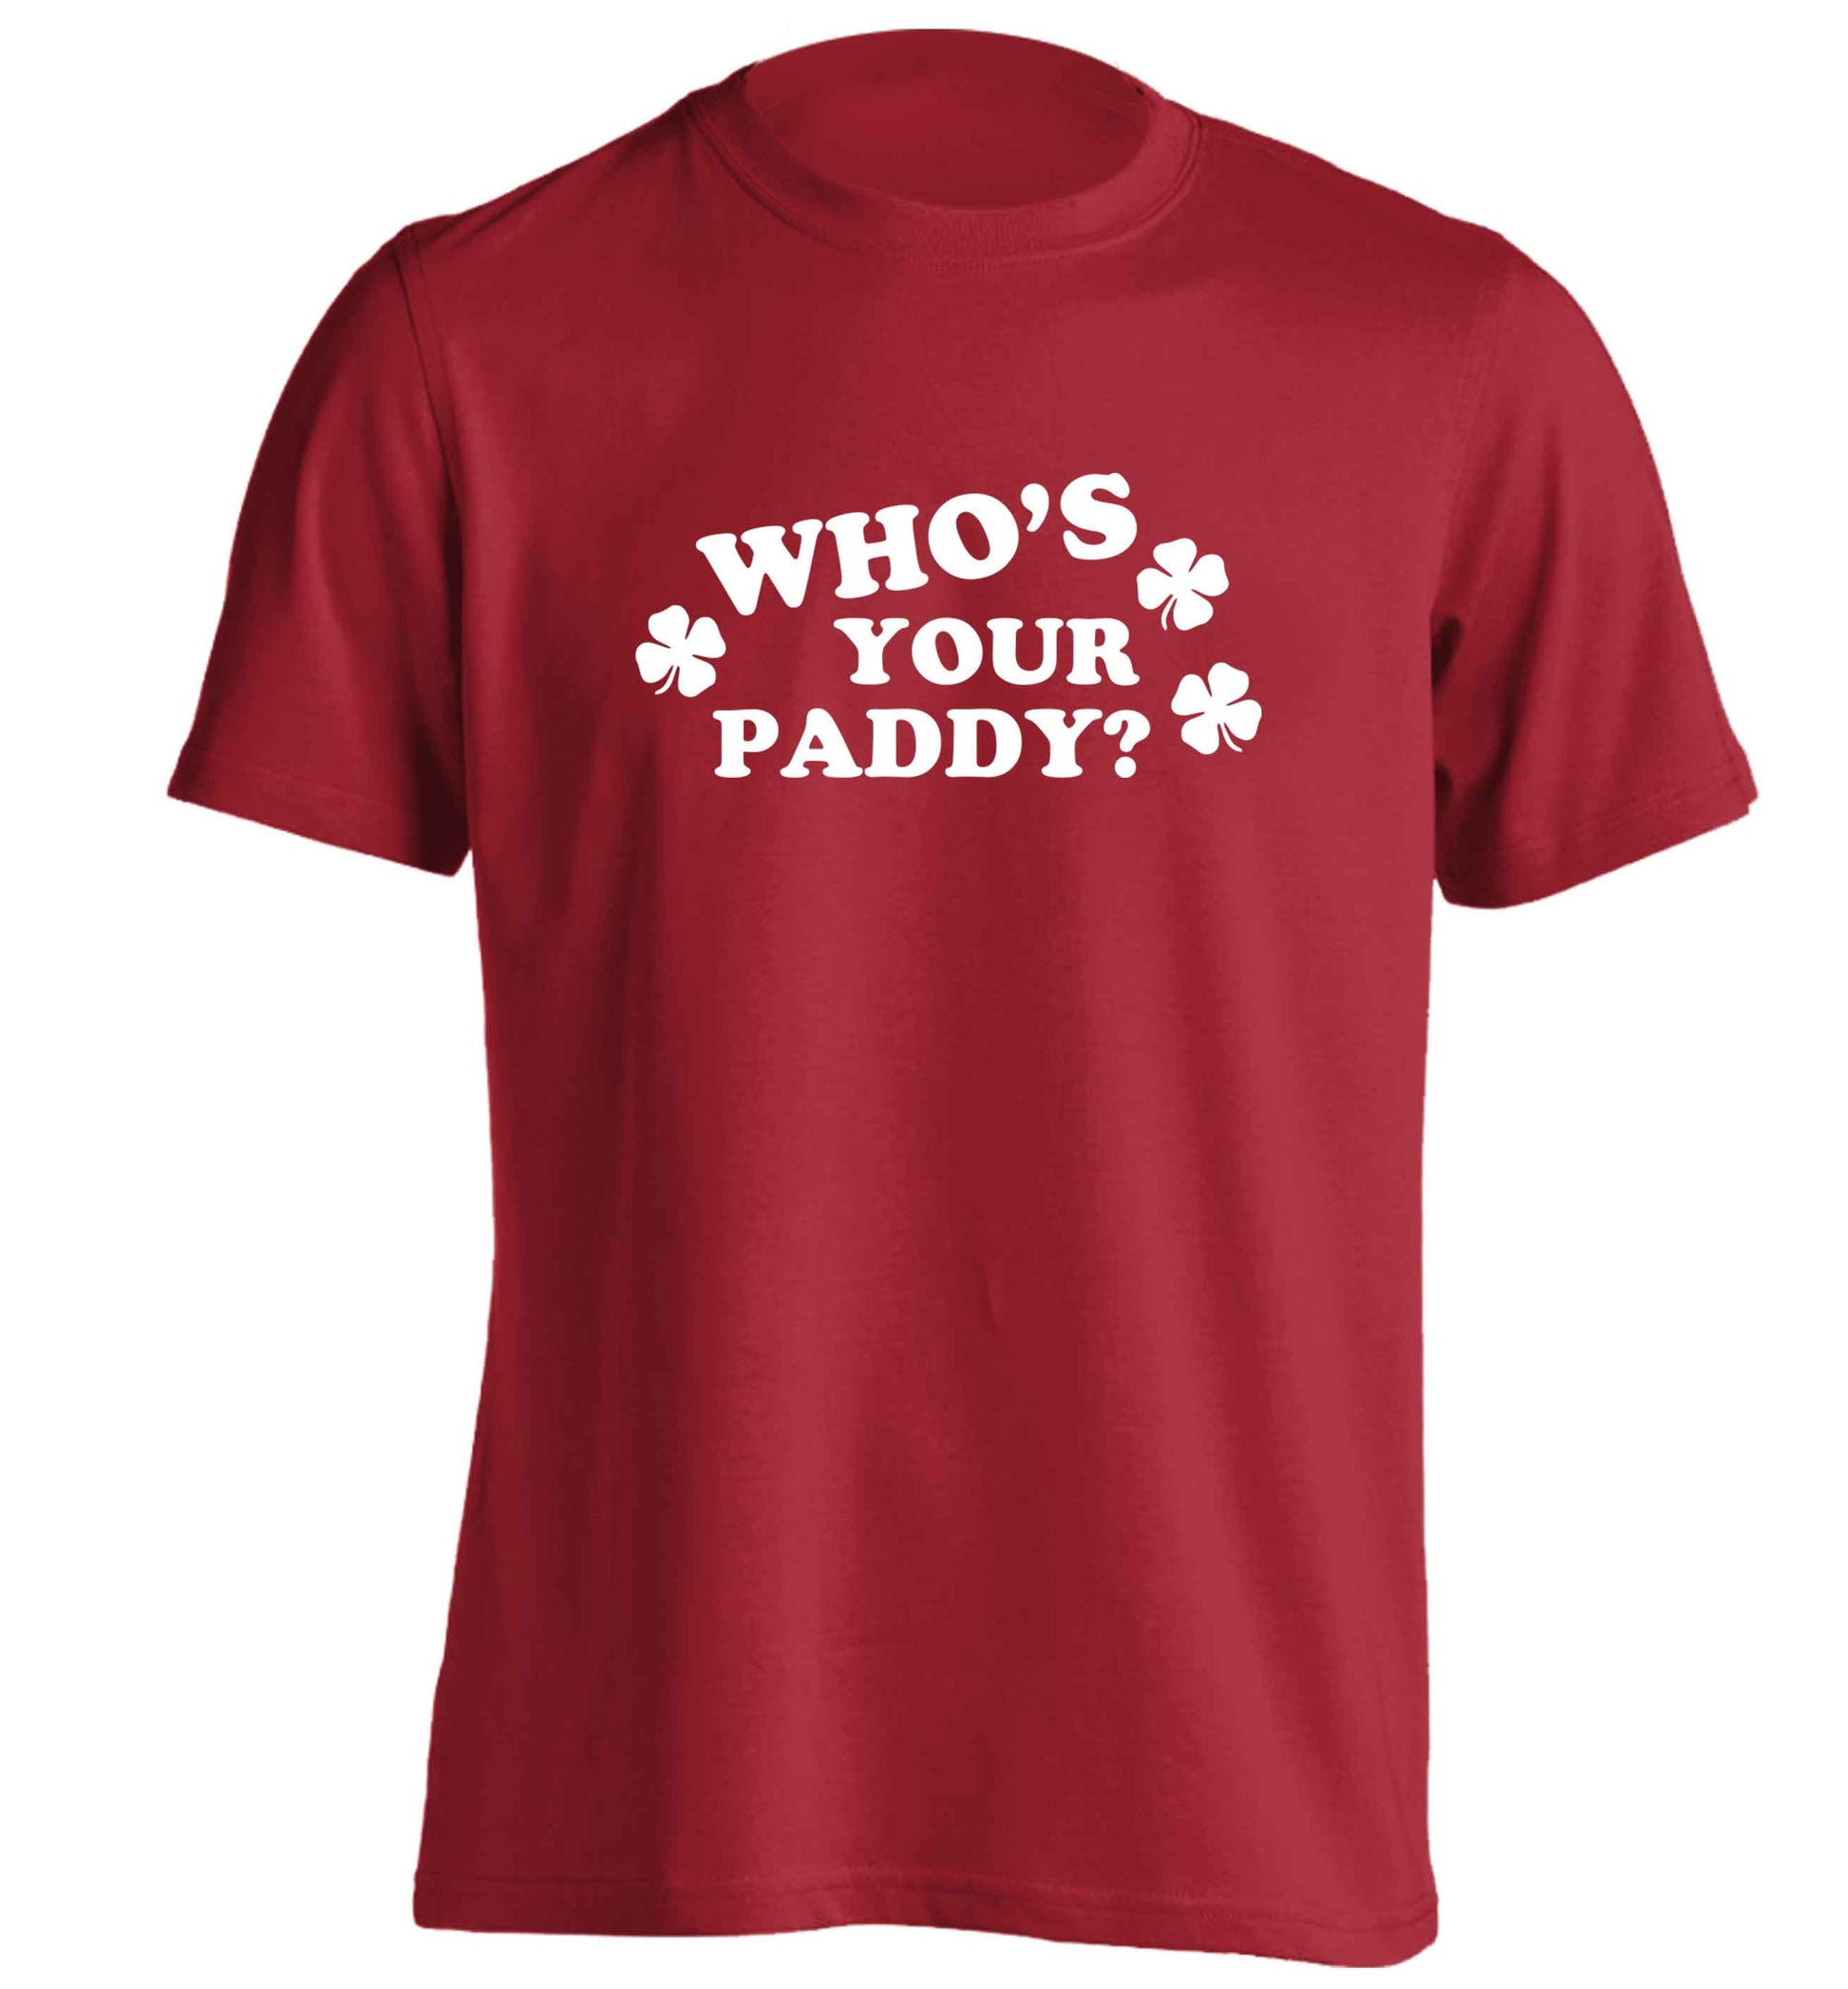 Who's your paddy? adults unisex red Tshirt 2XL